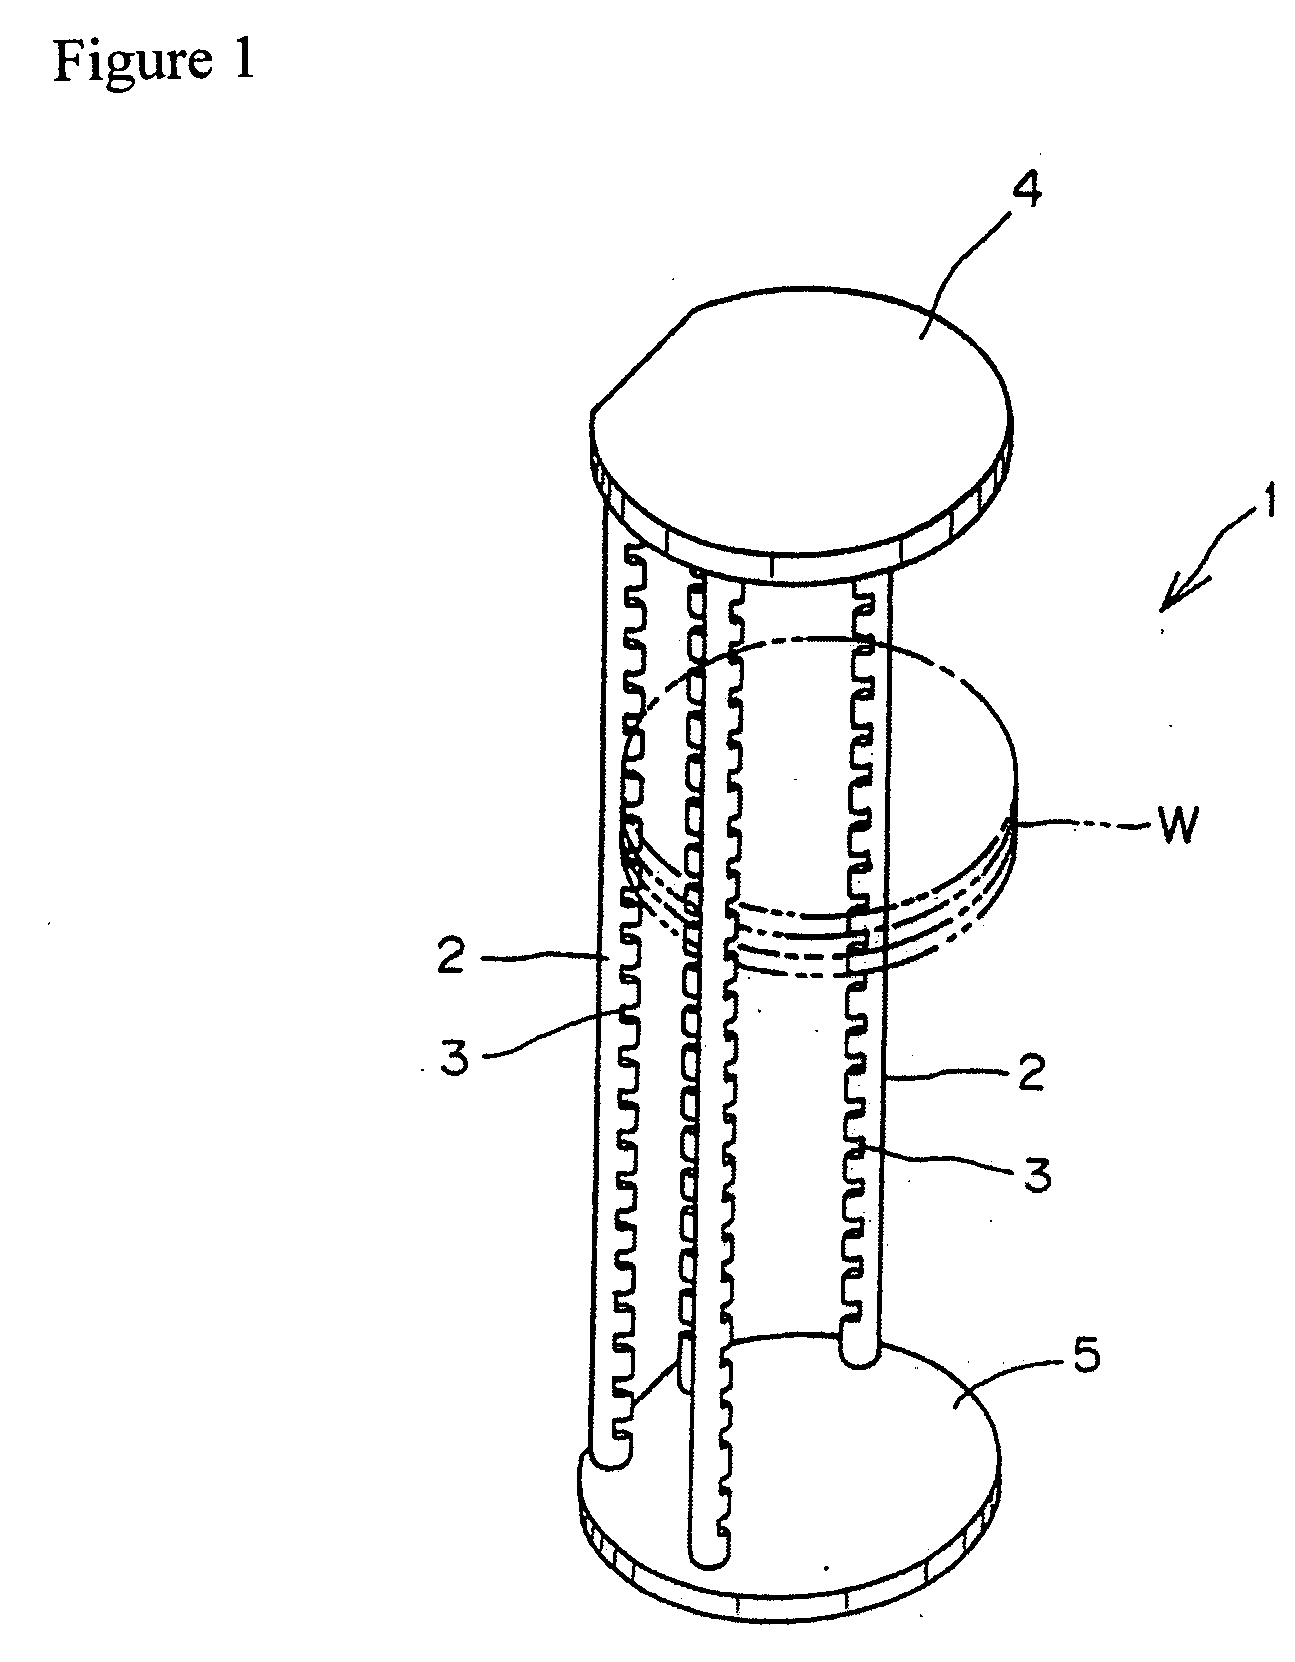 Quartz Glass Tool for Heat Treatment of Silicon Wafer and Process for Producing the Same